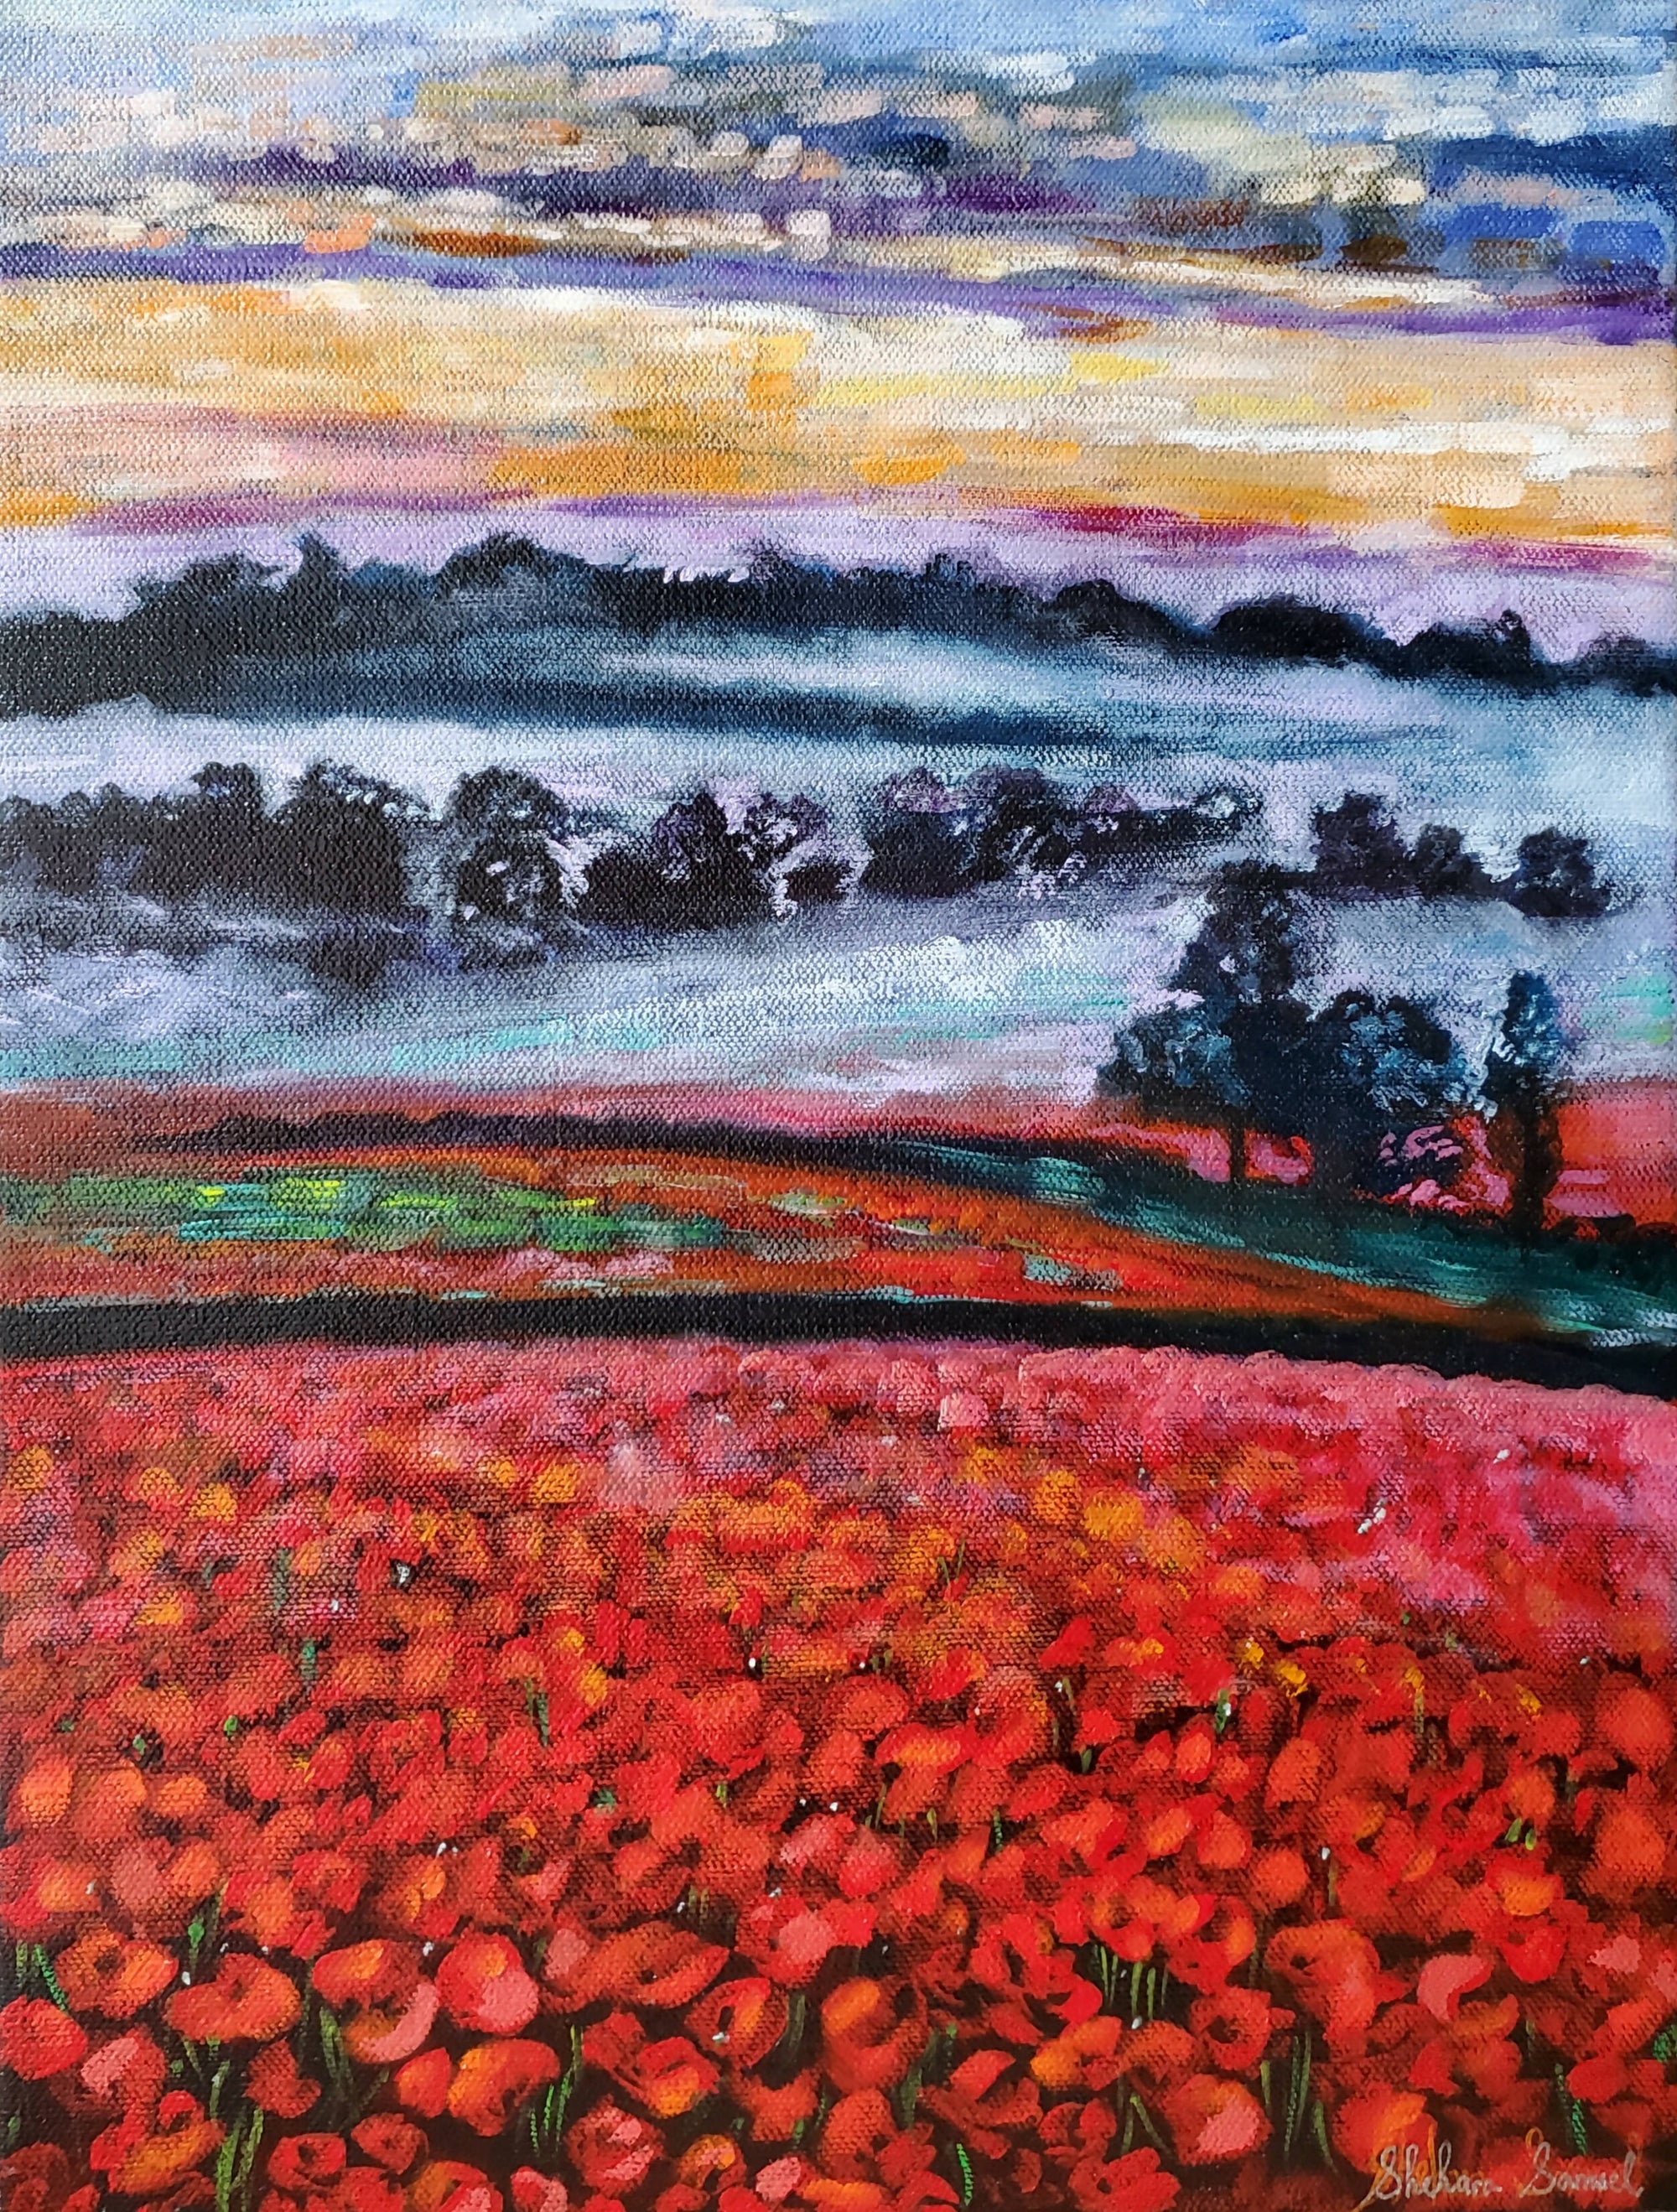 Art - Mixed Media/Oil Painting - "Fields of Poppies I "